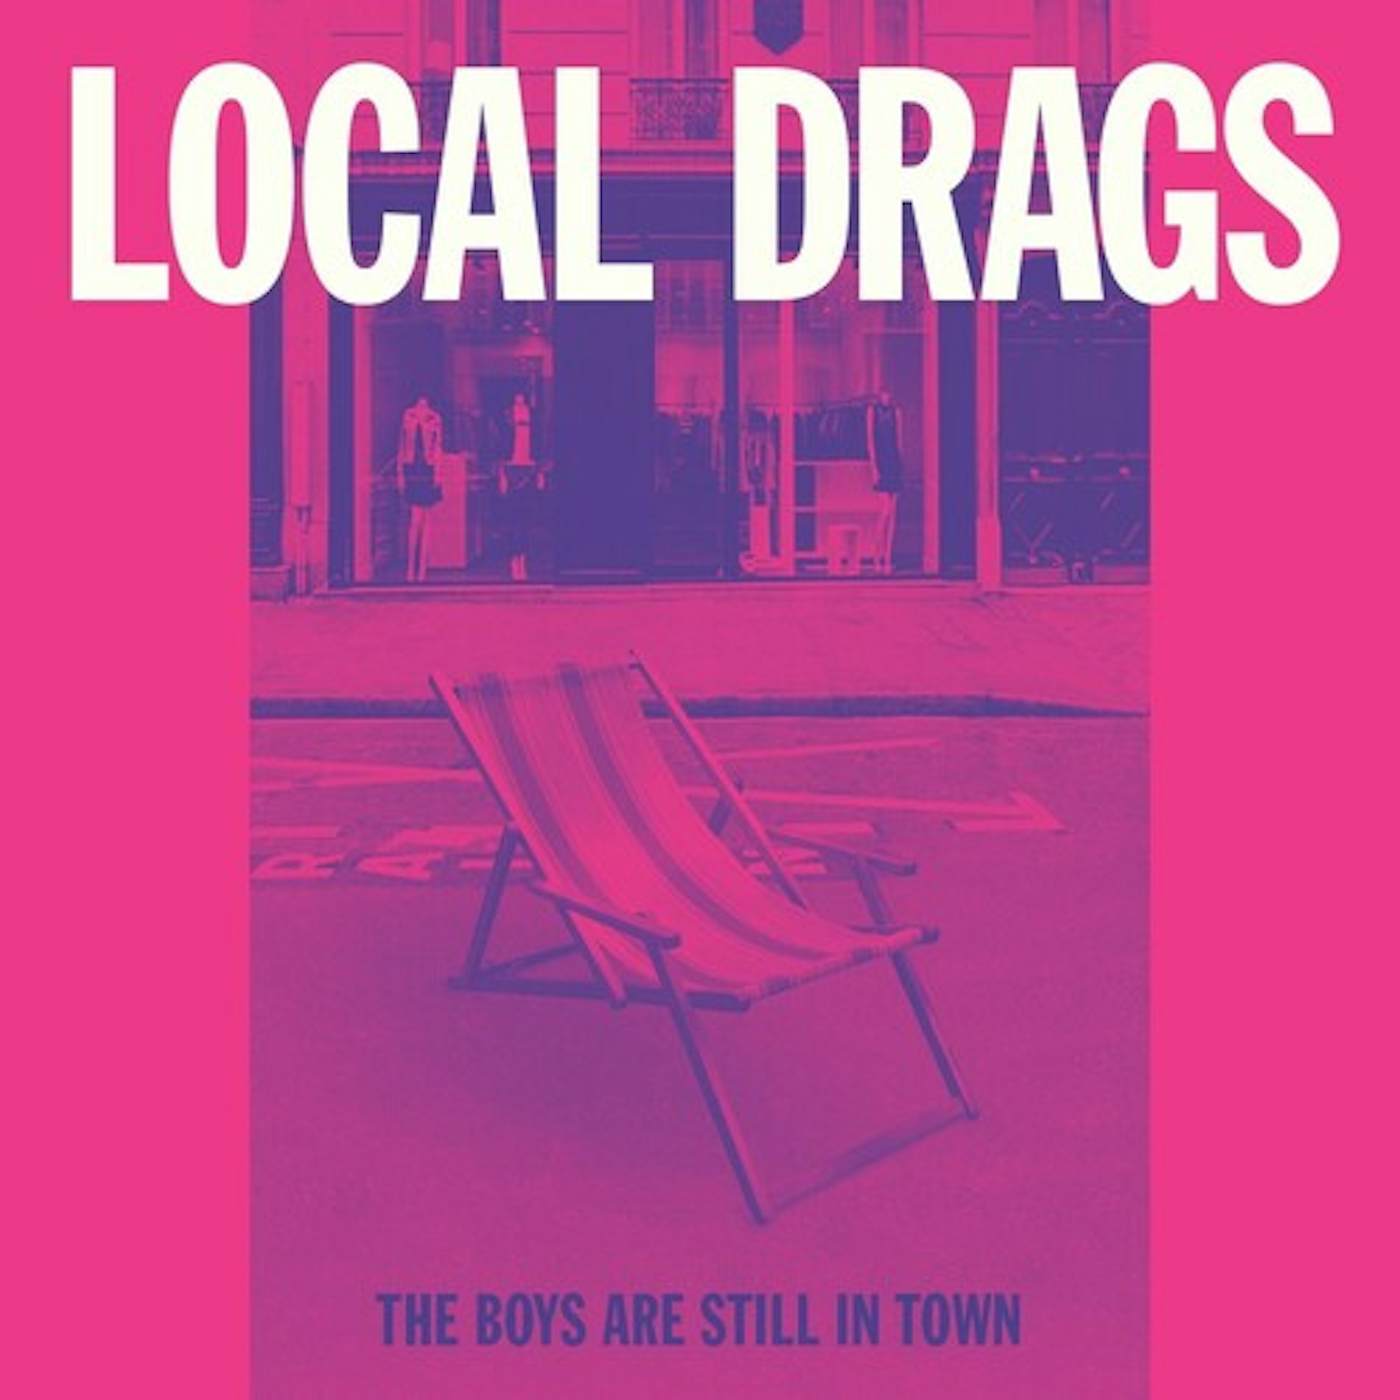 Local Drags BOYS ARE STILL IN TOWN Vinyl Record